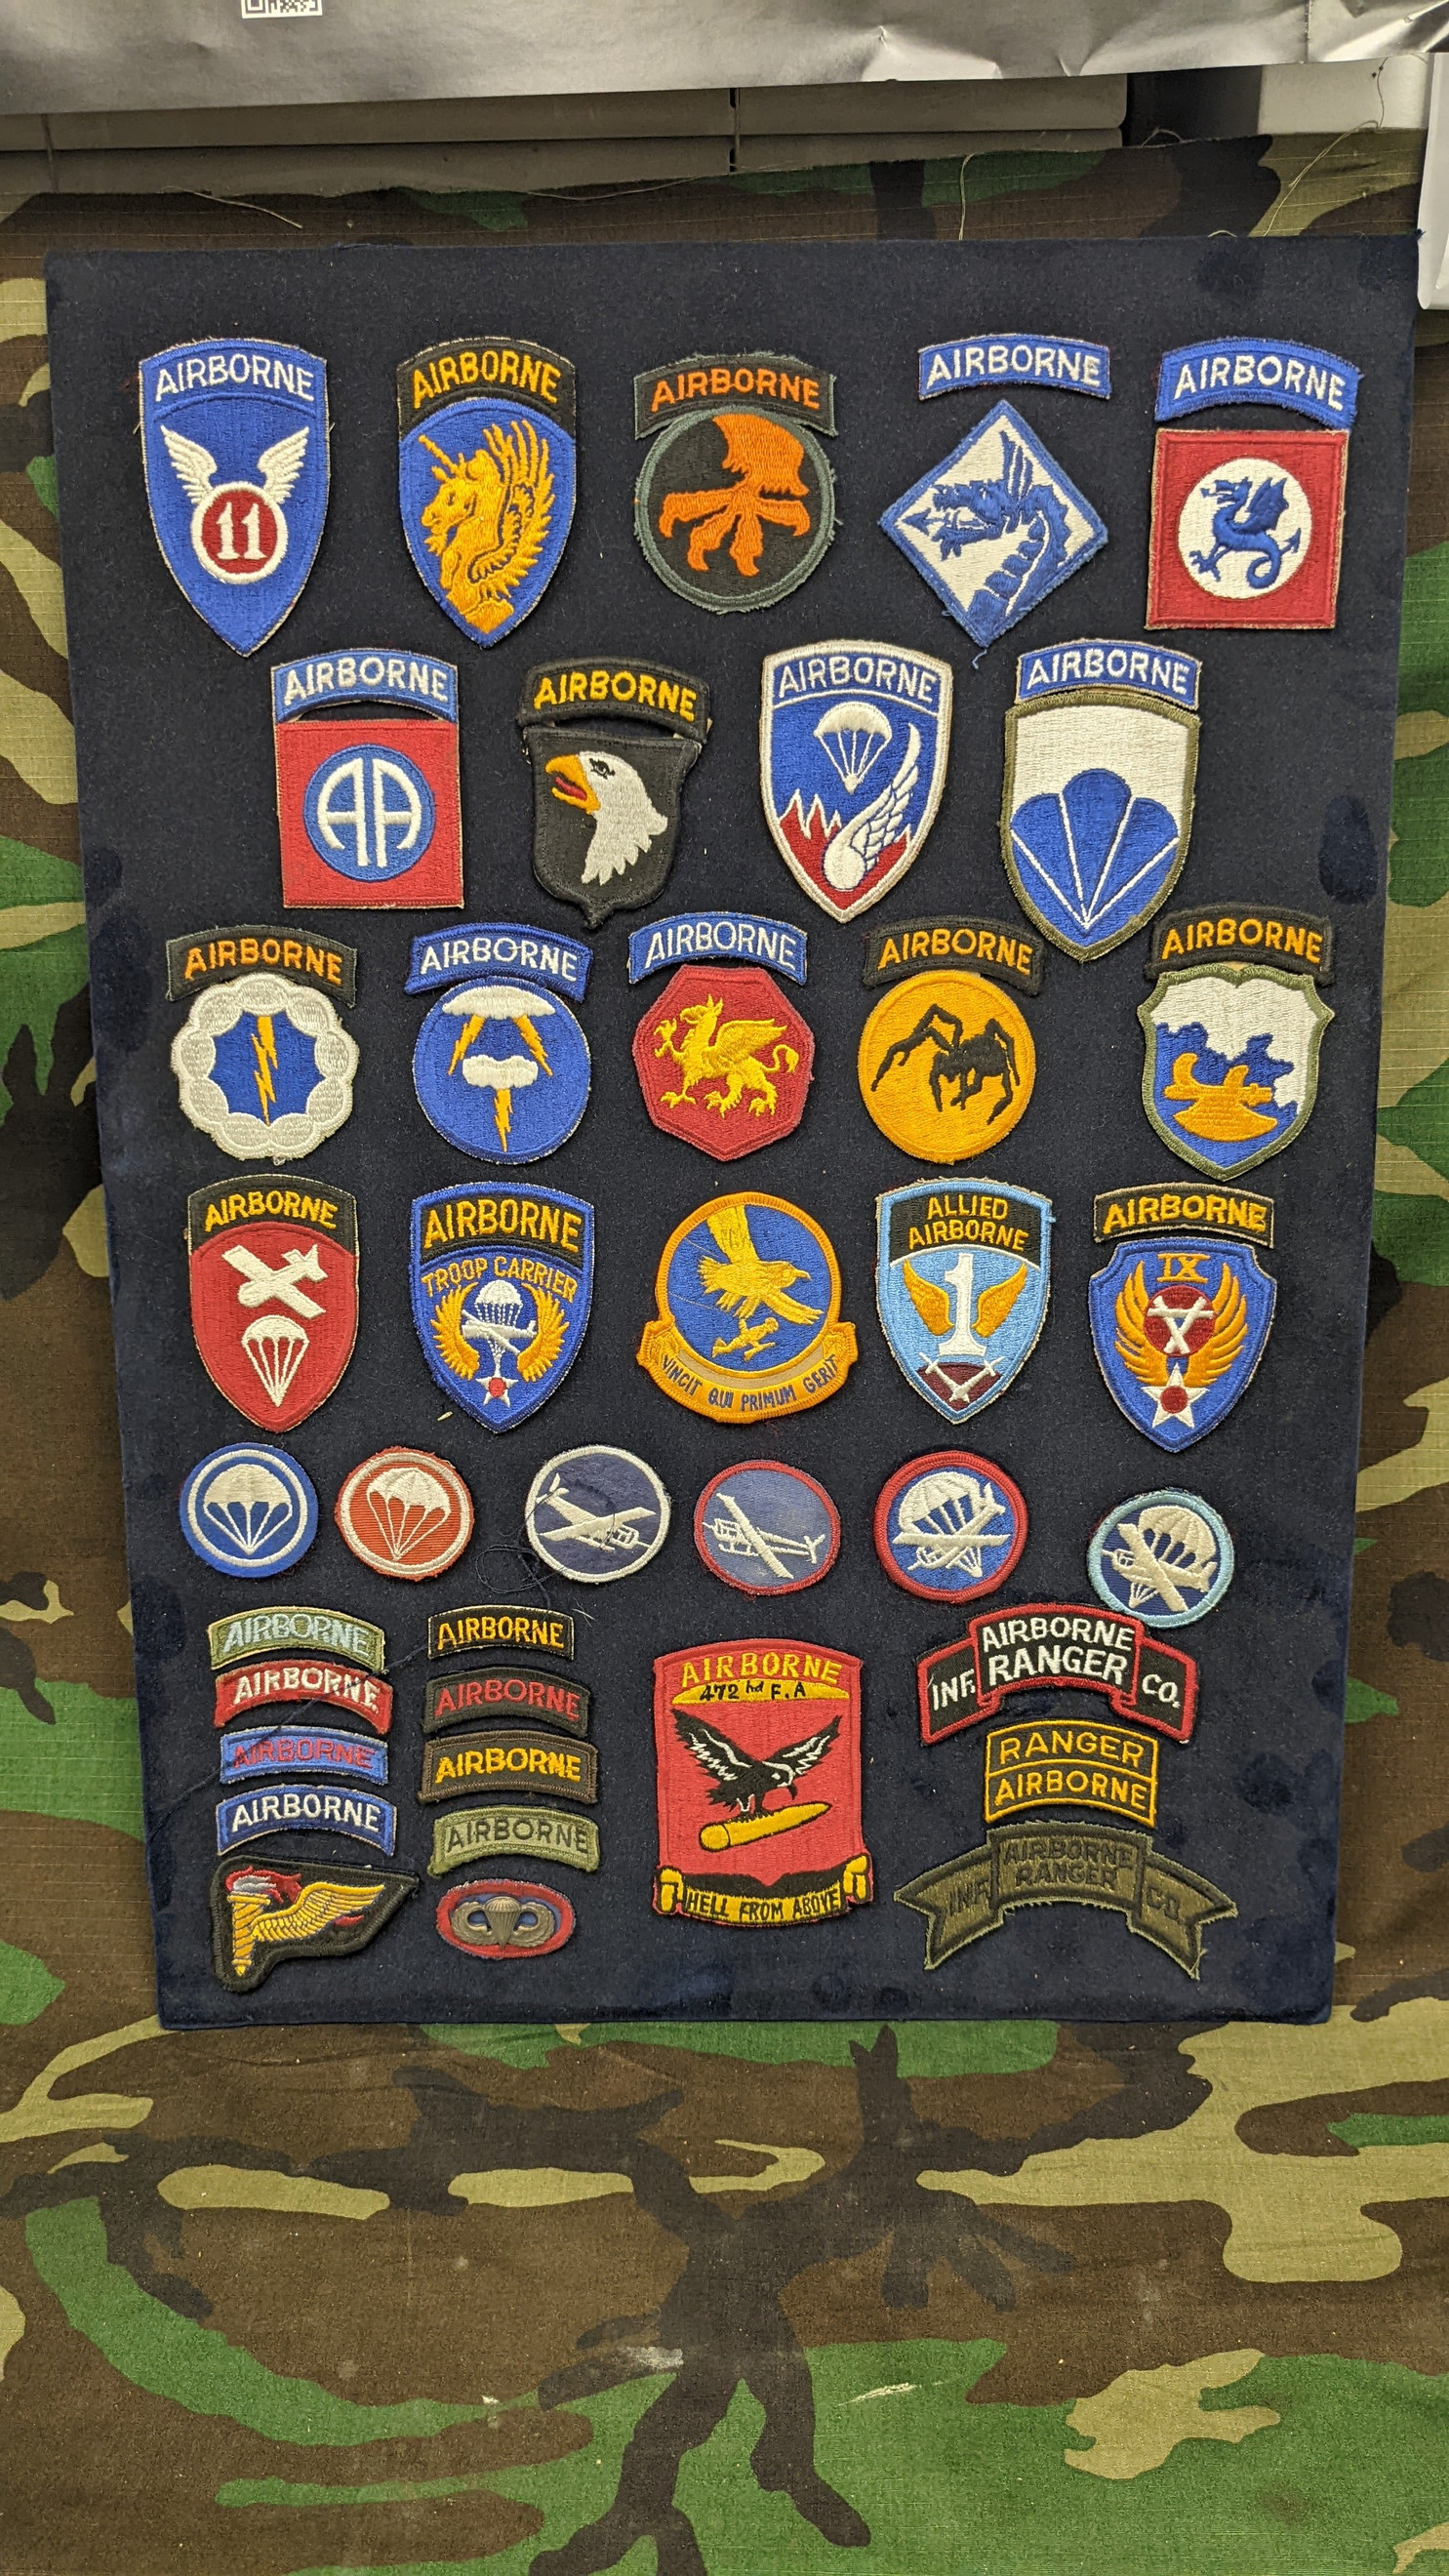 U.S. Armed Forces Airborne Patch Collection